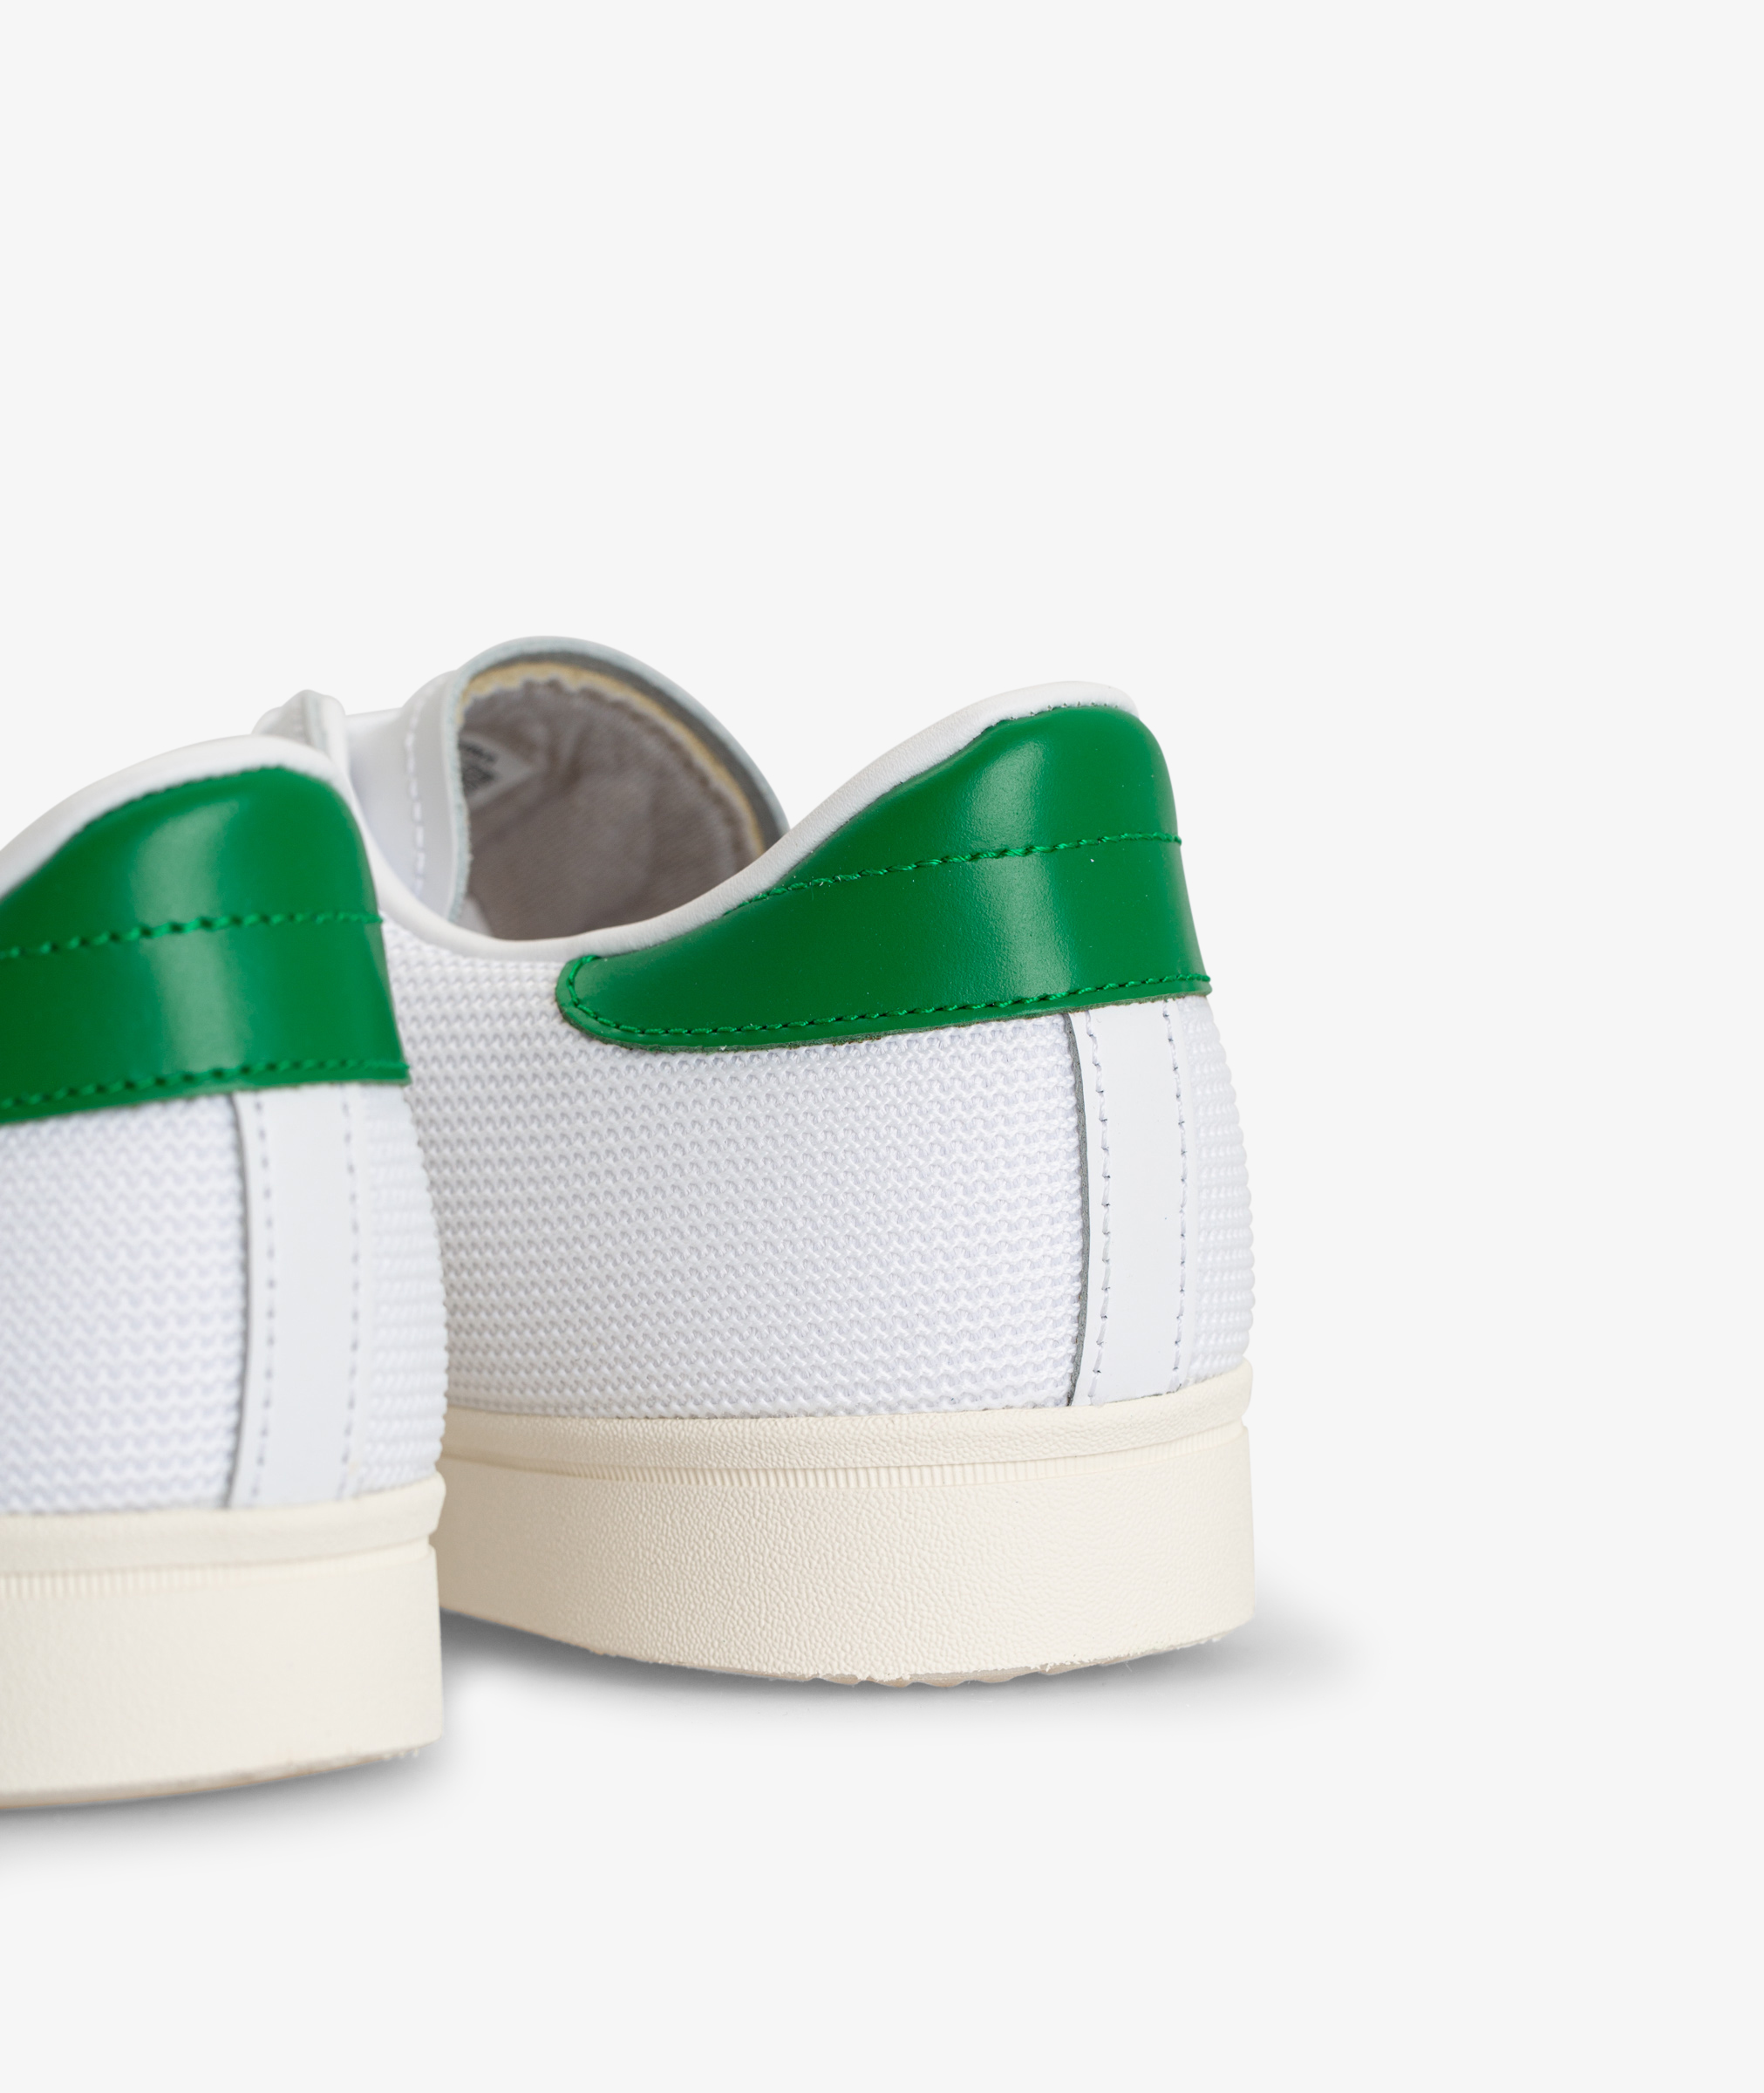 Norse Store Shipping Worldwide - Sneakers - Rod Laver Vintage